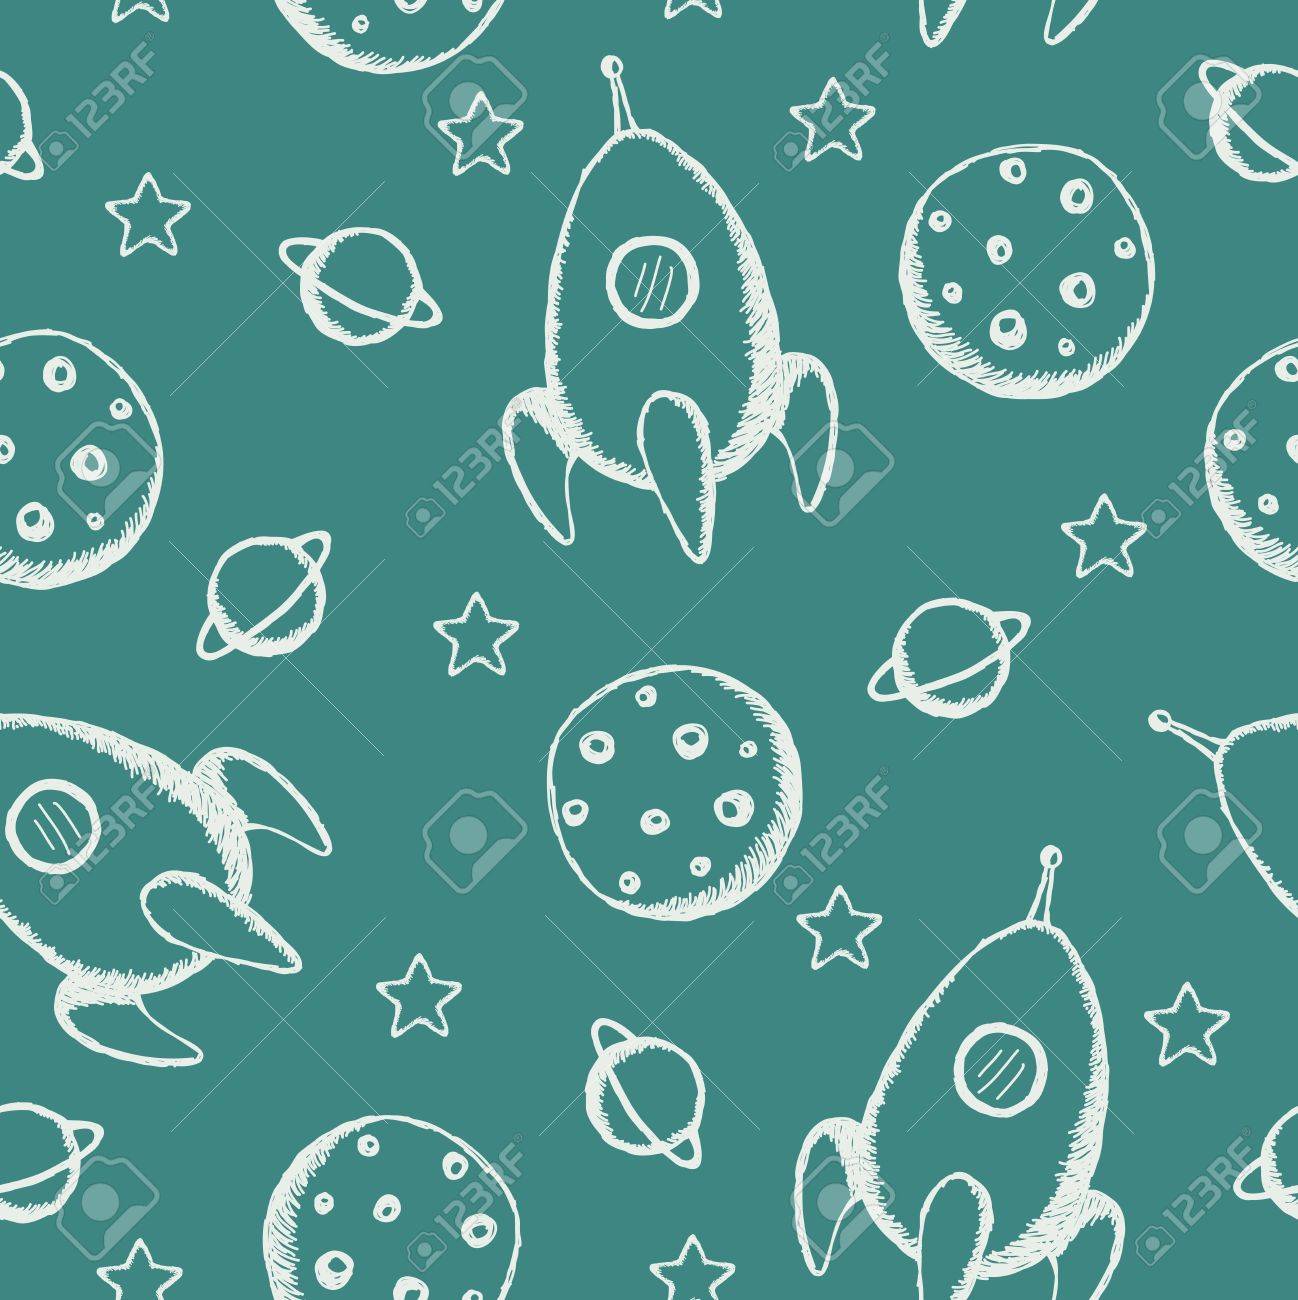 Seamless Childish Wallpaper With Rockets And Plas Royalty